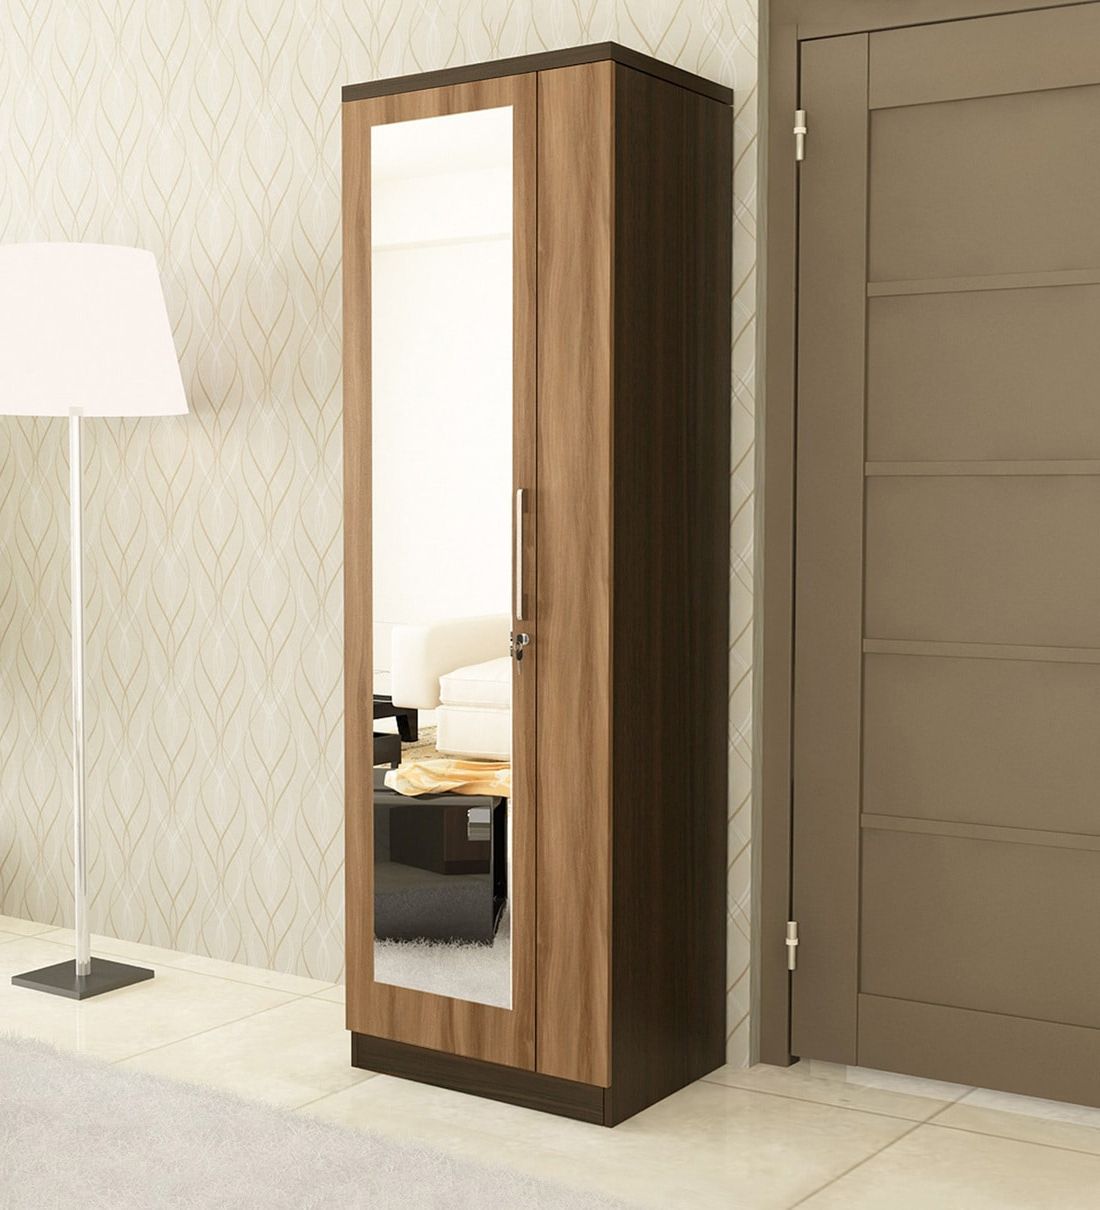 Buy Kosmo Ken 1 Door Wardrobe In Walnut & Natural Wenge Finish With Mirror  At 42% Offspacewood | Pepperfry Within One Door Mirrored Wardrobes (View 13 of 20)